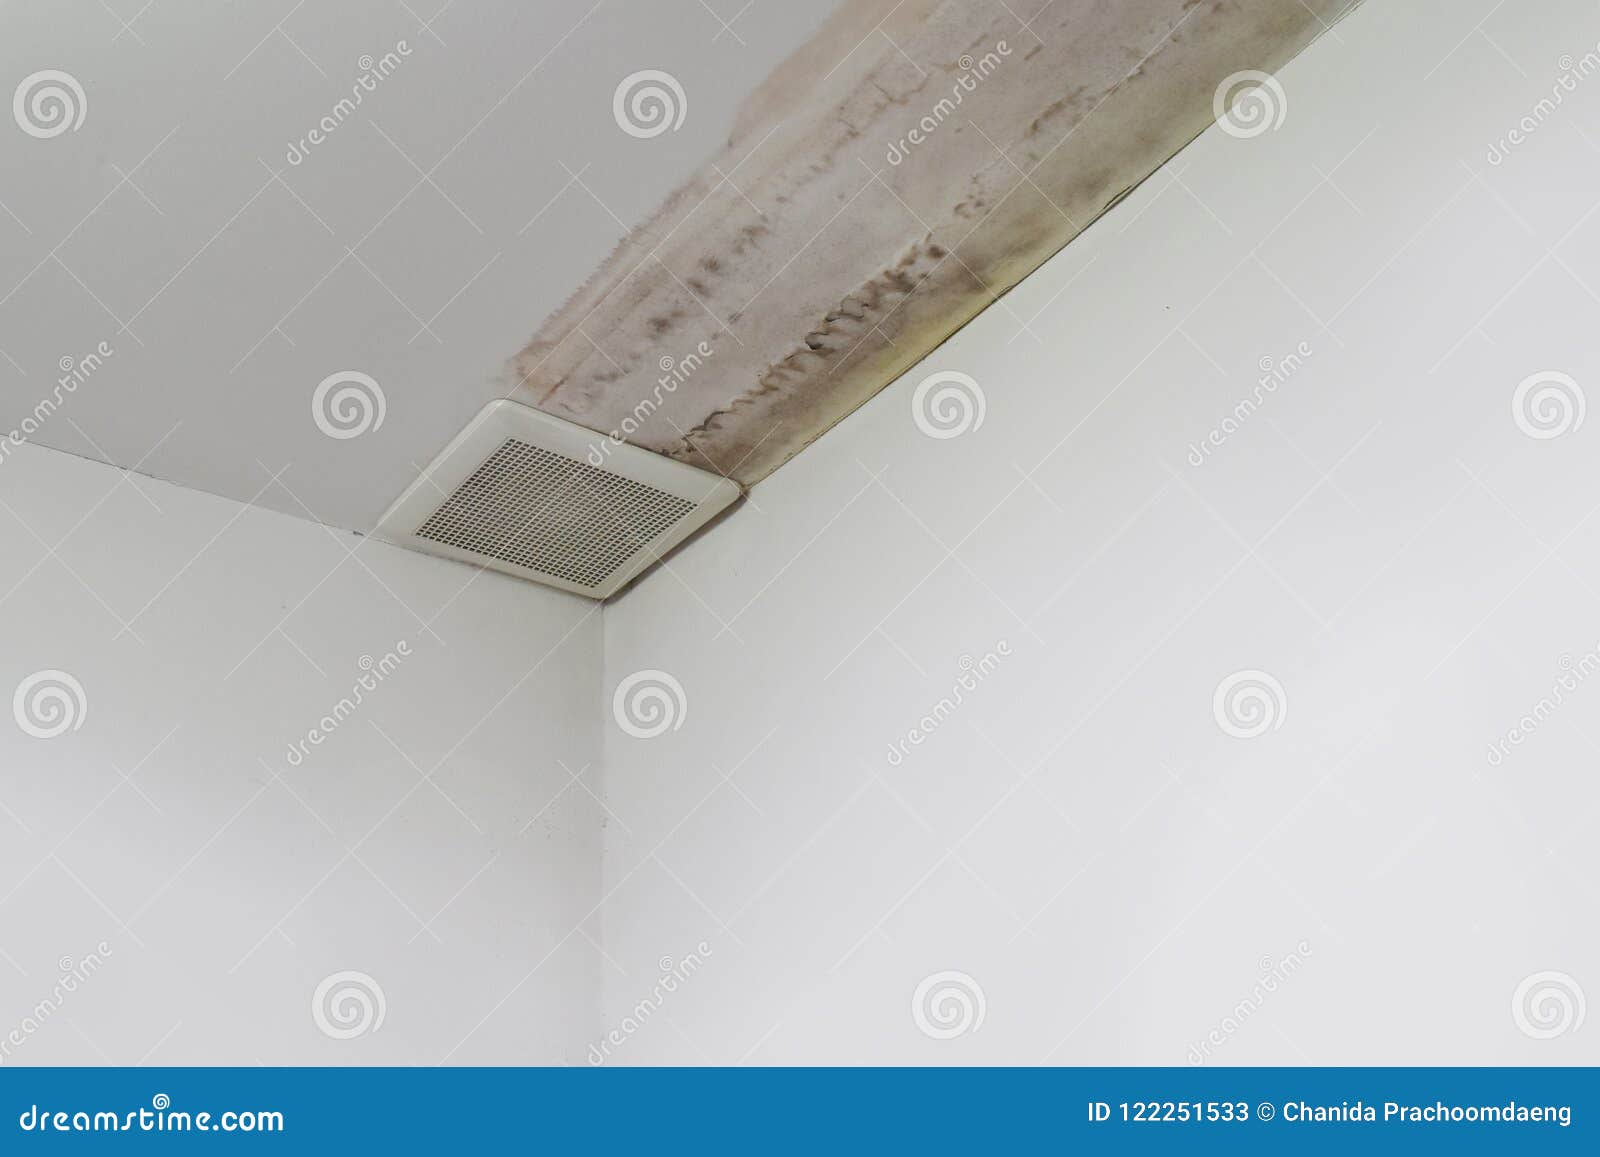 Rain Water Leaks On The Ceiling Causing Damage Tiles And Gypsum